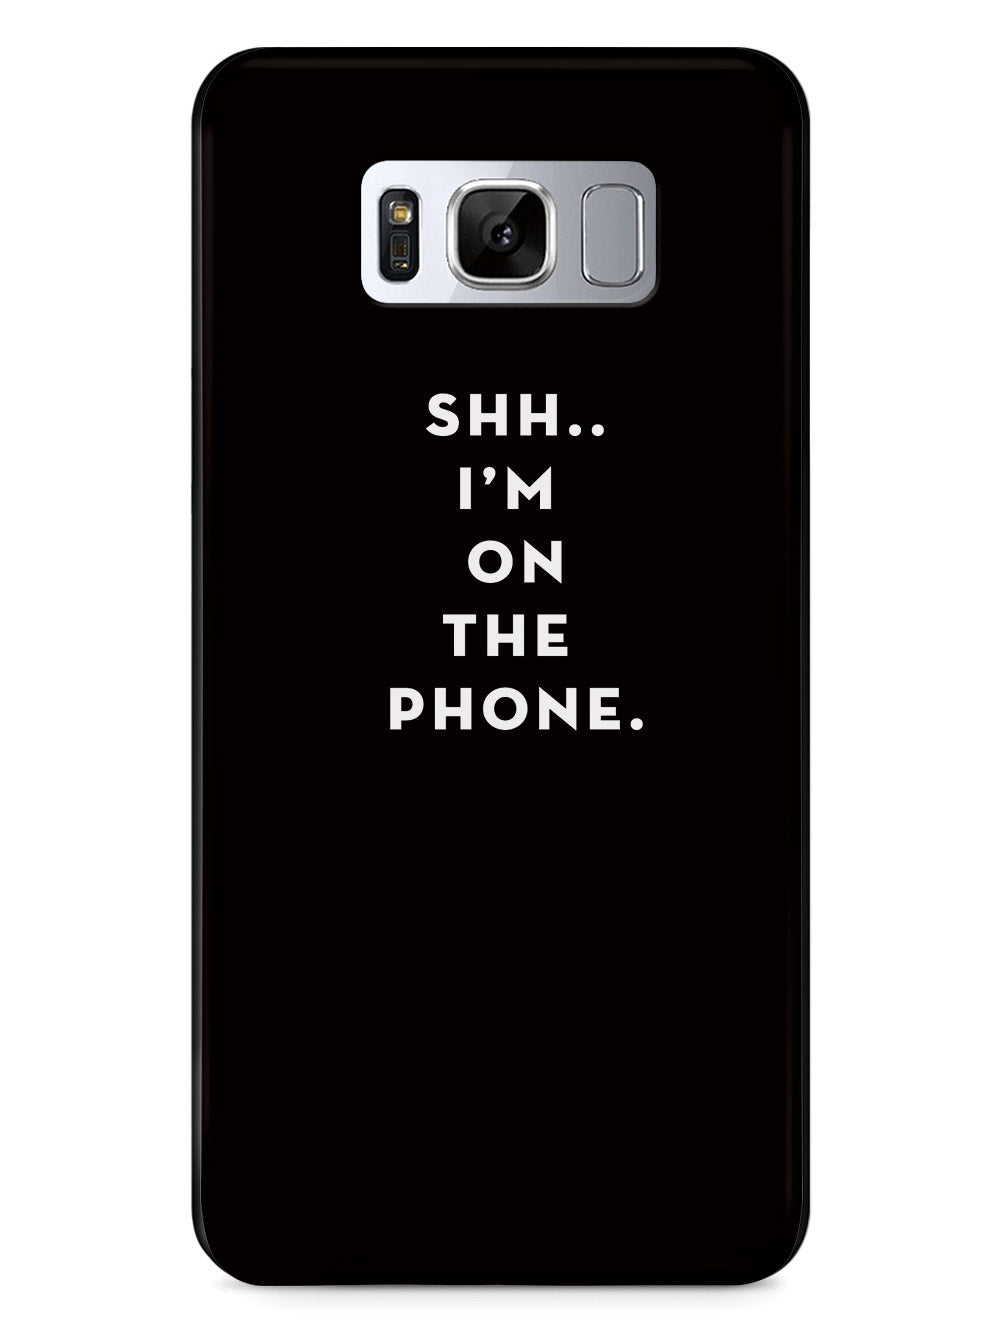 Shh..I'm on the Phone - Humor Funny Case